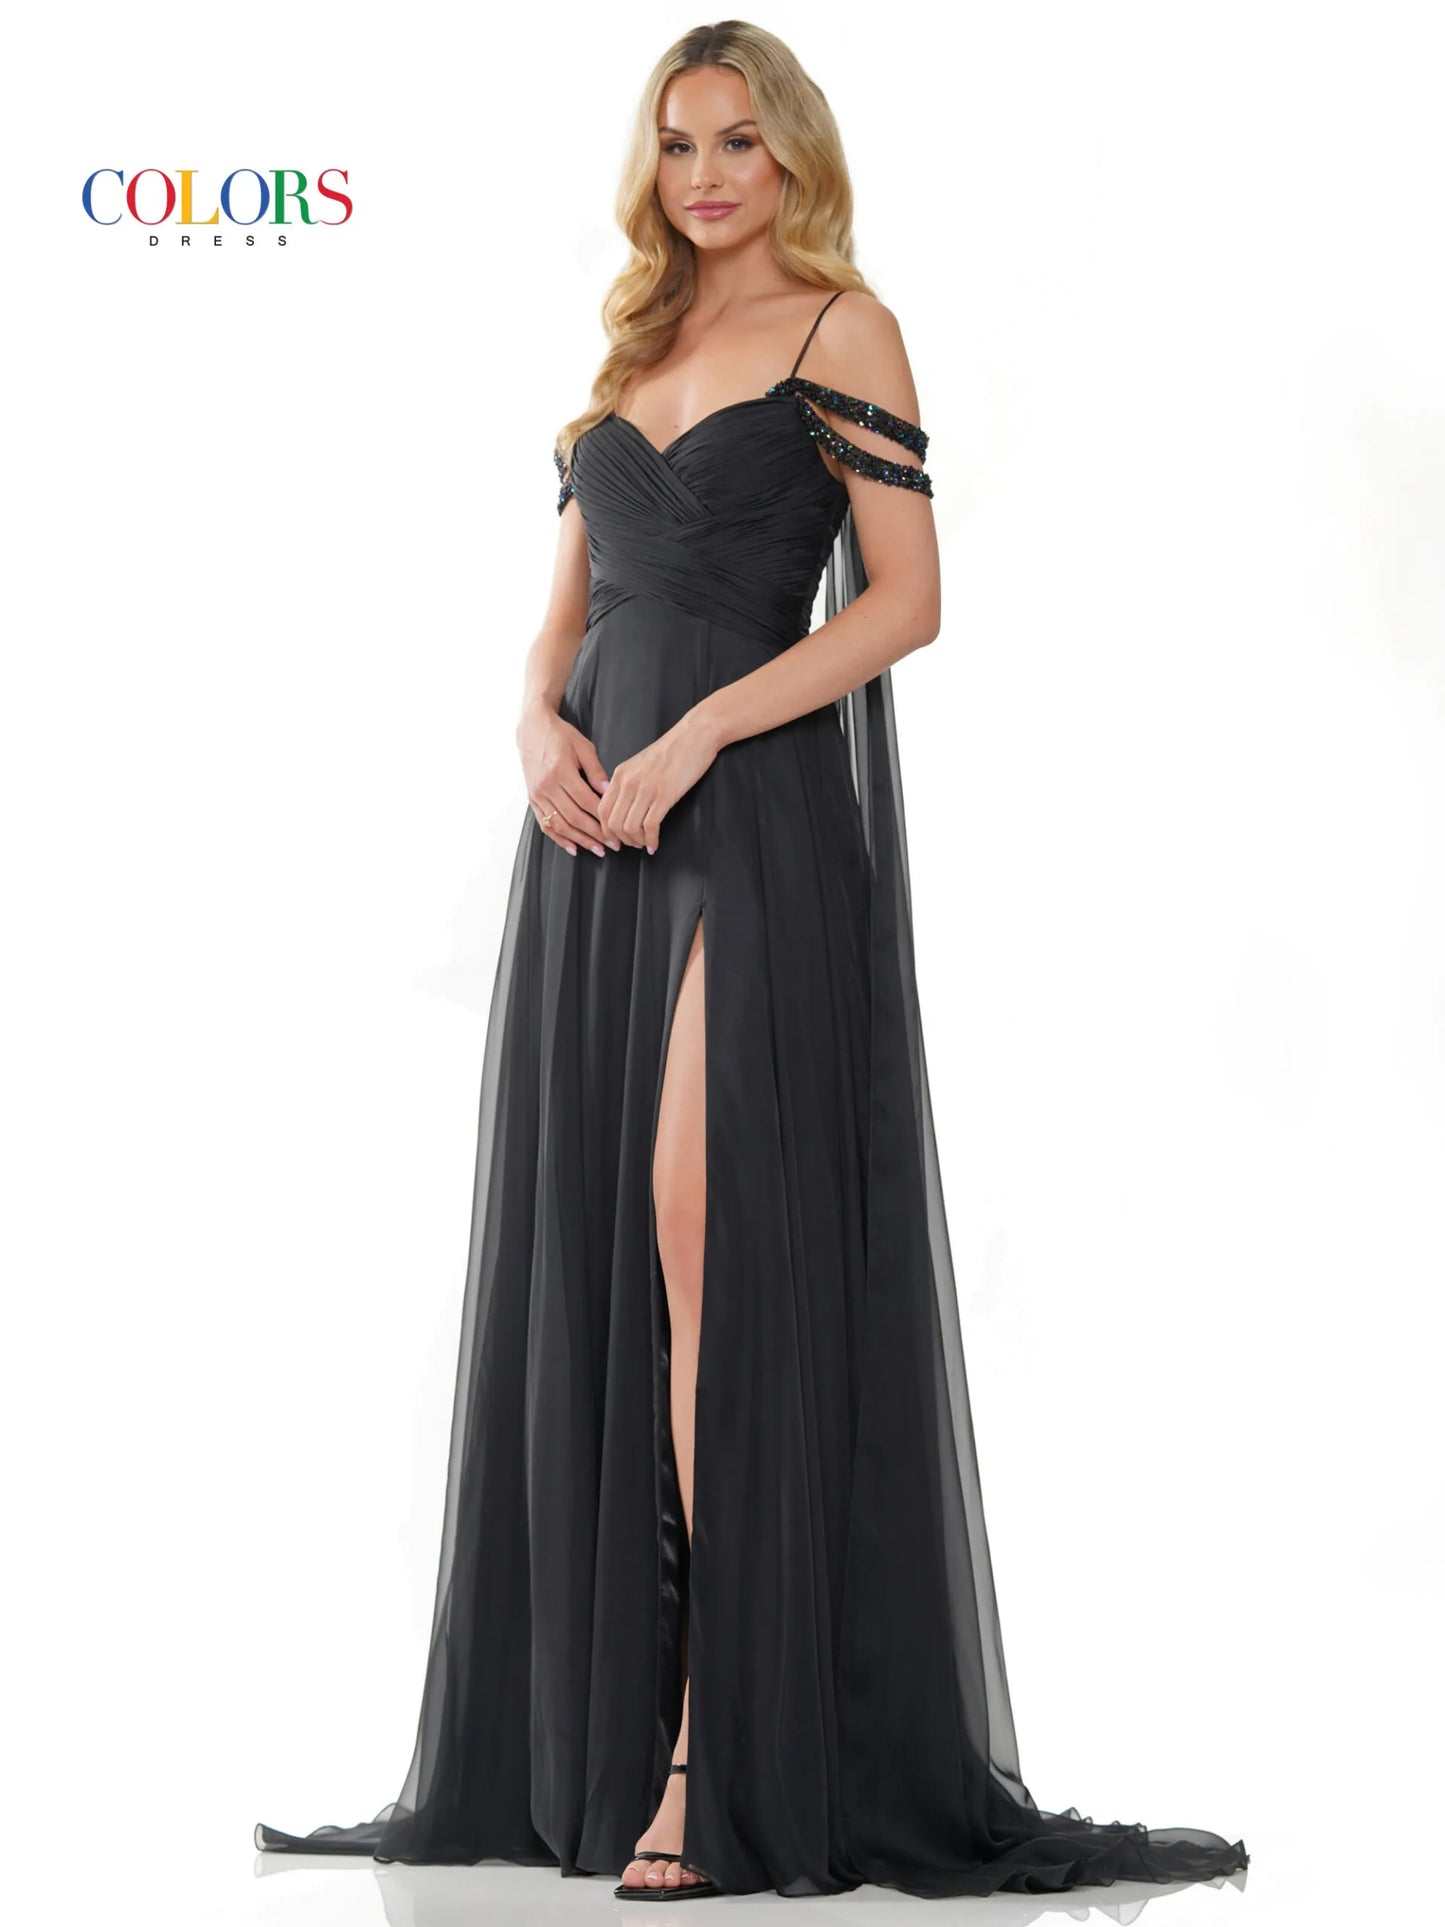 Elevate your style with the Colors Dress 3101 A Line Chiffon Pageant Dress. This stunning gown features an off the shoulder design and double beaded straps for a touch of elegance. The flowing chiffon cape adds a dramatic flair, while the maxi slit showcases your legs. Perfect for prom or any special occasion. corset back   Sizes: 0-20  Colors: Black, Royal, Deep Green, Hot Pink, Wine